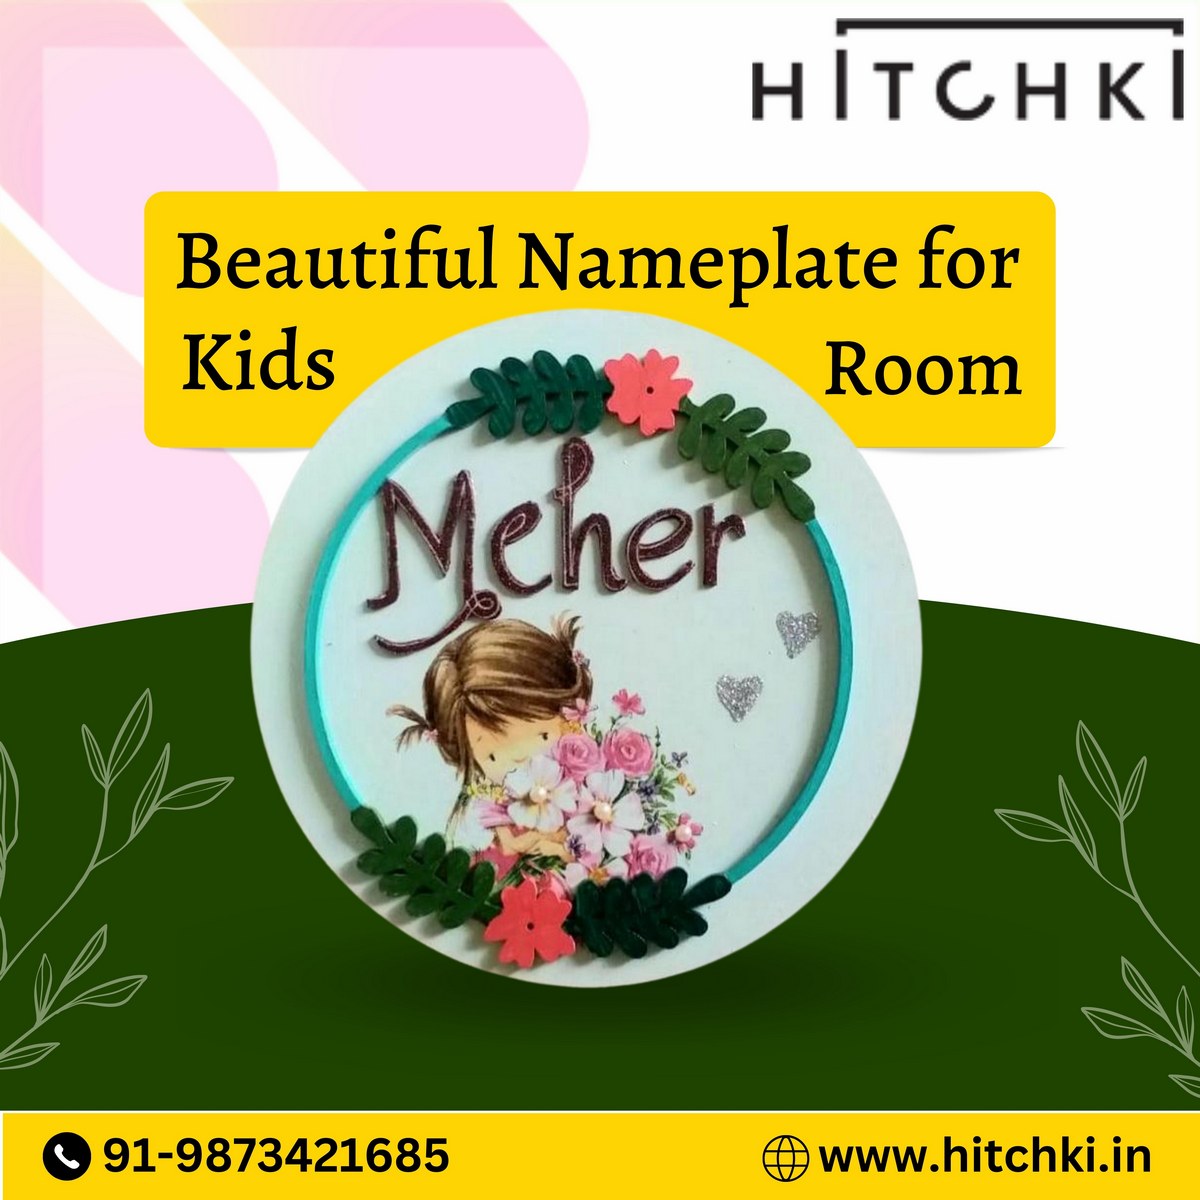 Personalize Your Childs Space With Beautiful Kids Nameplate